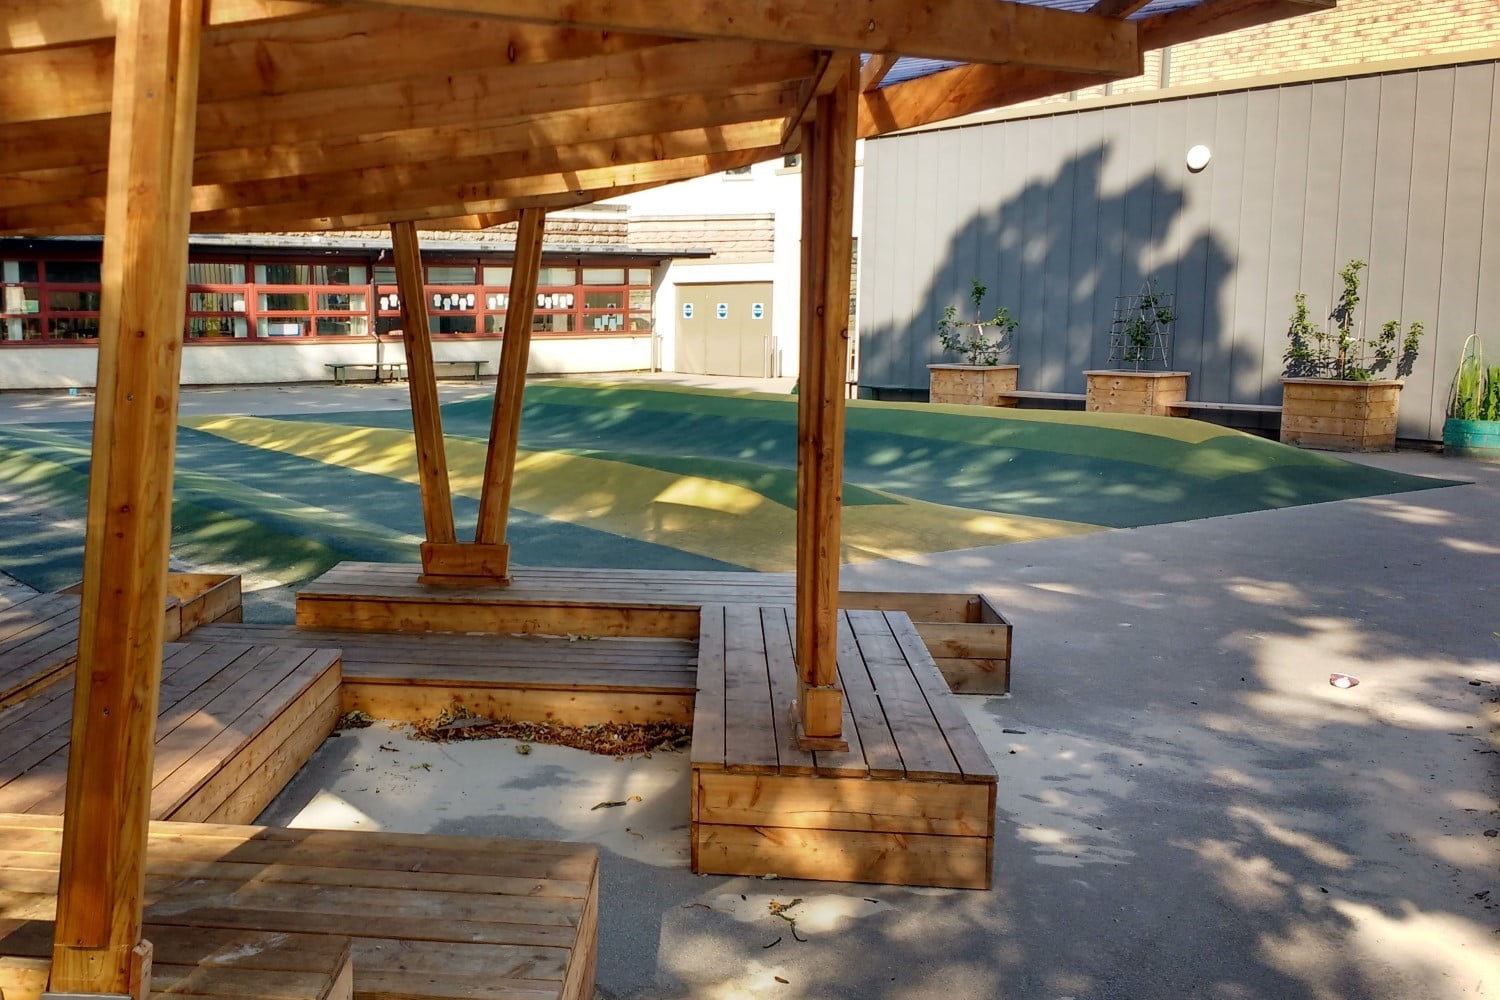 An area of sheltered seating in some climate ready school grounds.